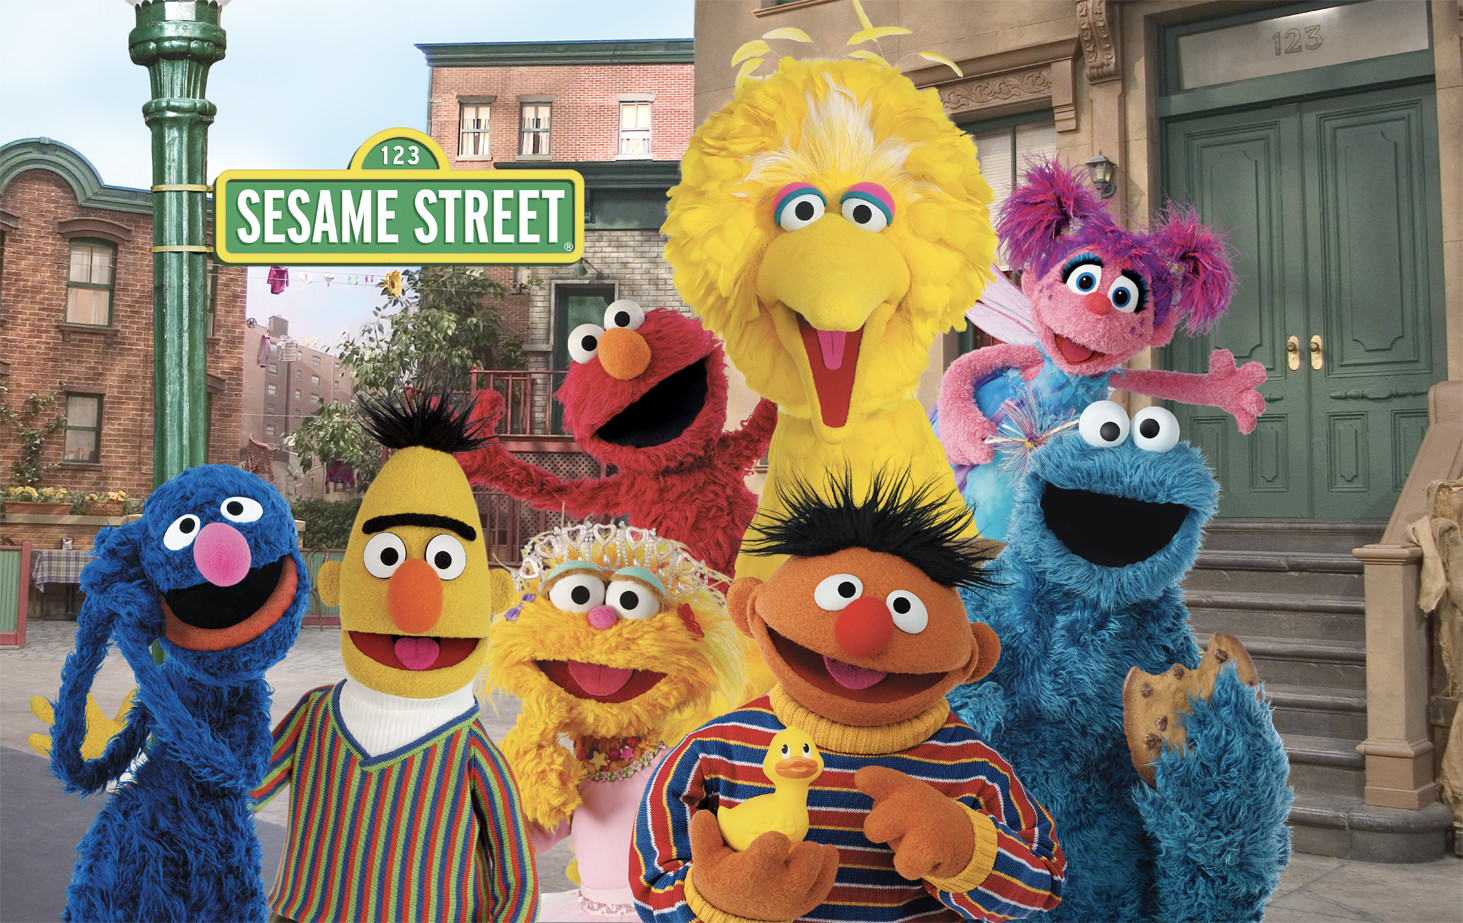 About Sesame Street.